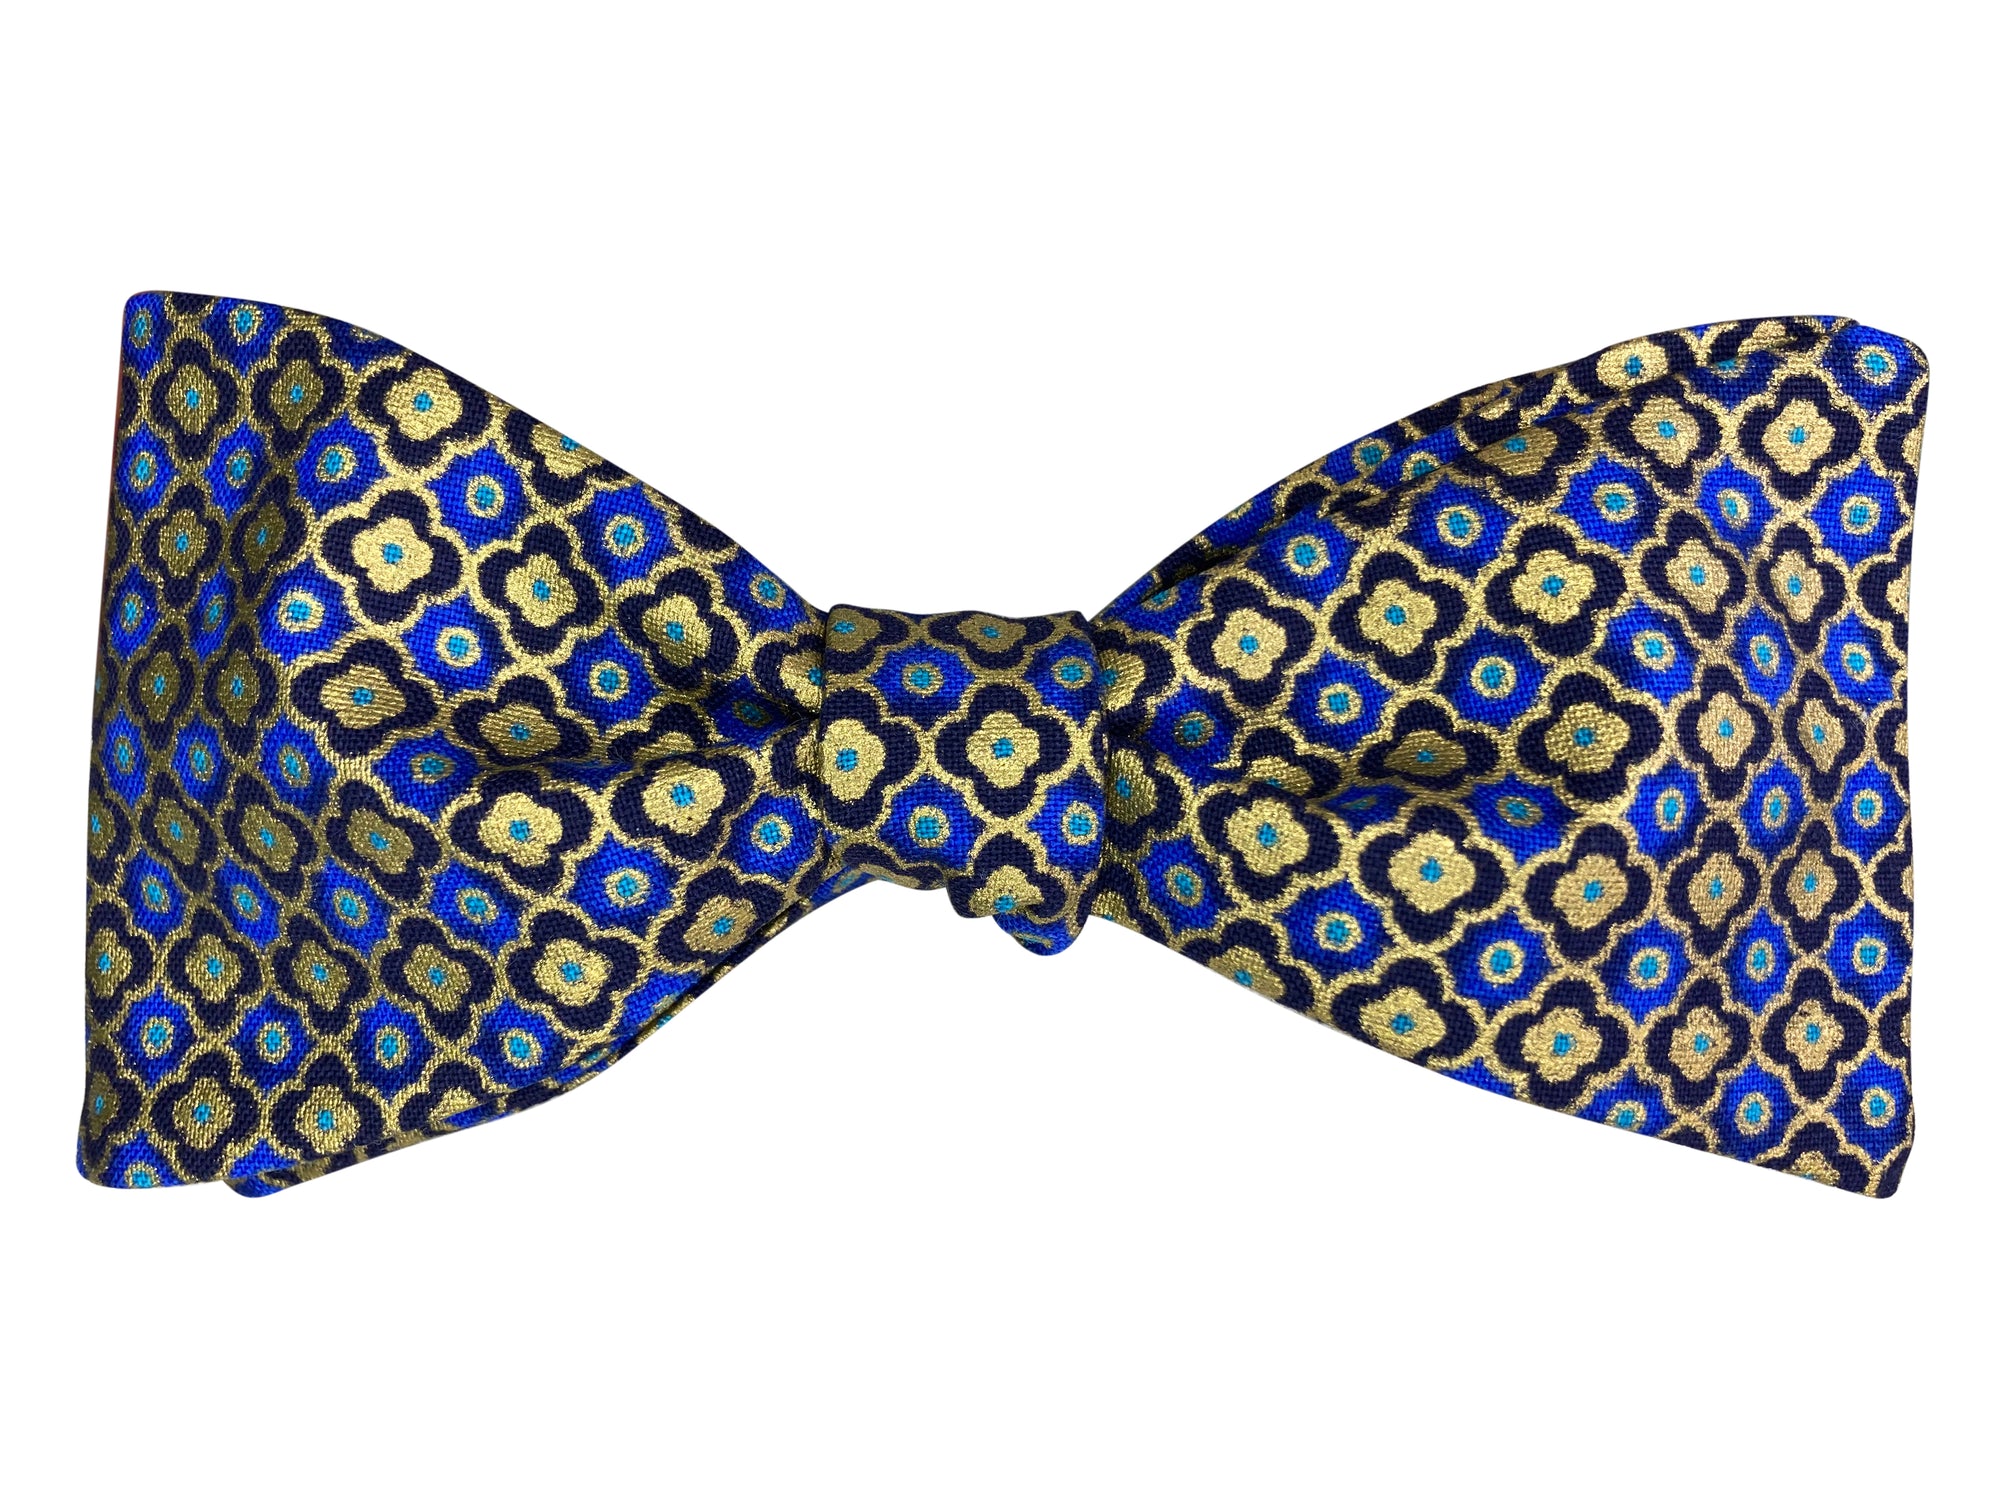 Blue and gold mosaic self tie bow tie